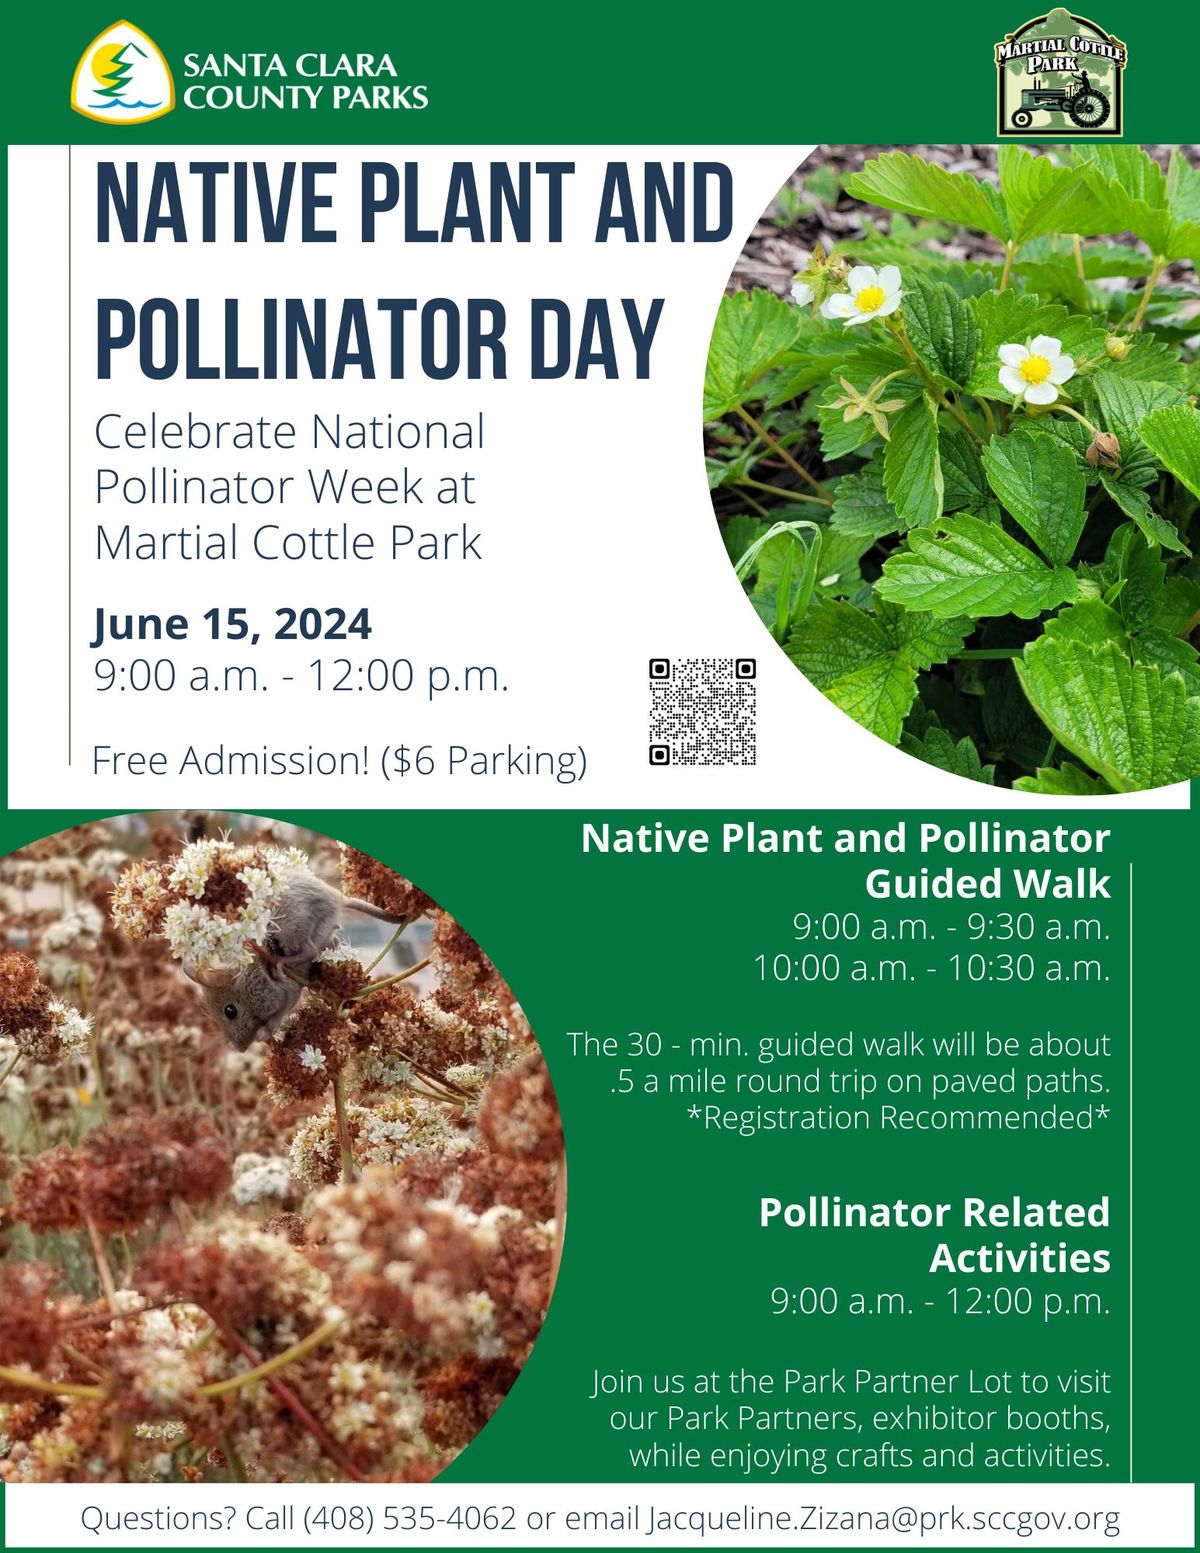 Native Plant and Pollinator Day